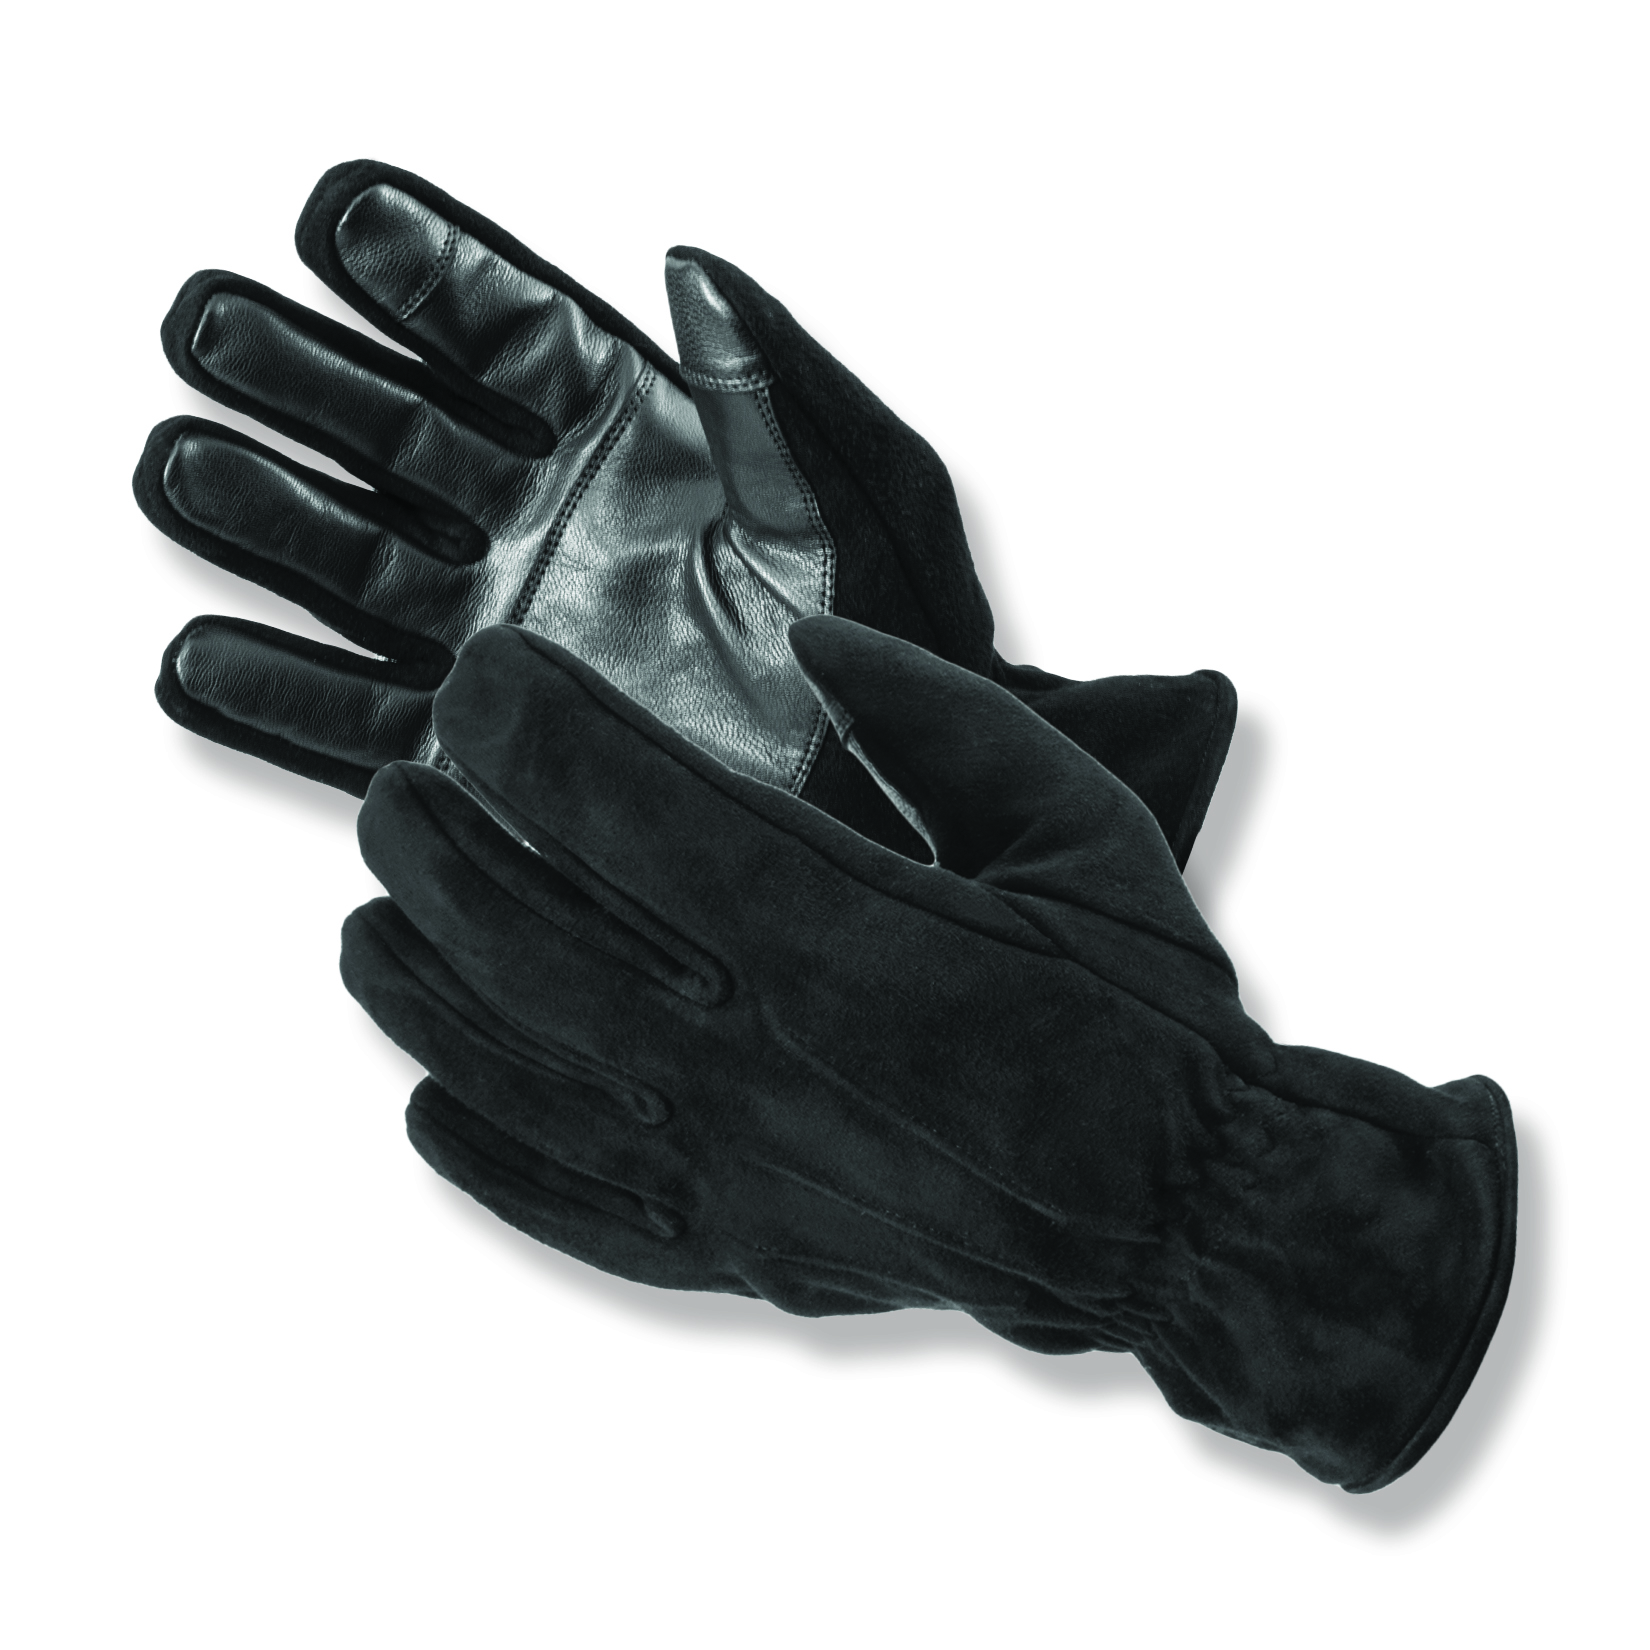 Suede leather back with grain leather palm Omaha TS™ Winter Uniform Gloves are touchscreen compatible and lined with fleece and insulated with 40 gram Thinsulate